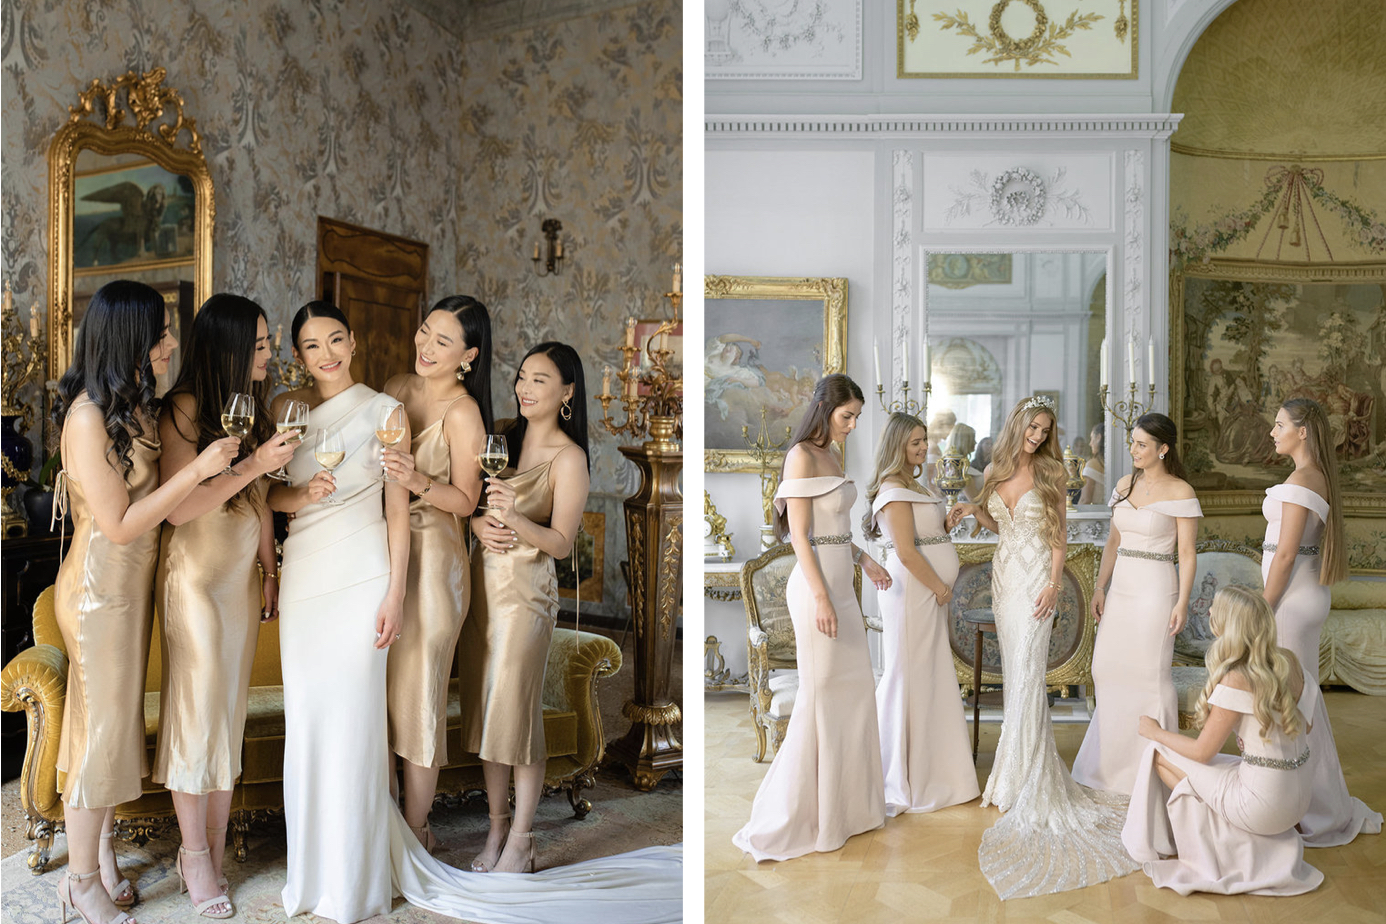 Our ultimate guide to bridesmaids dresses